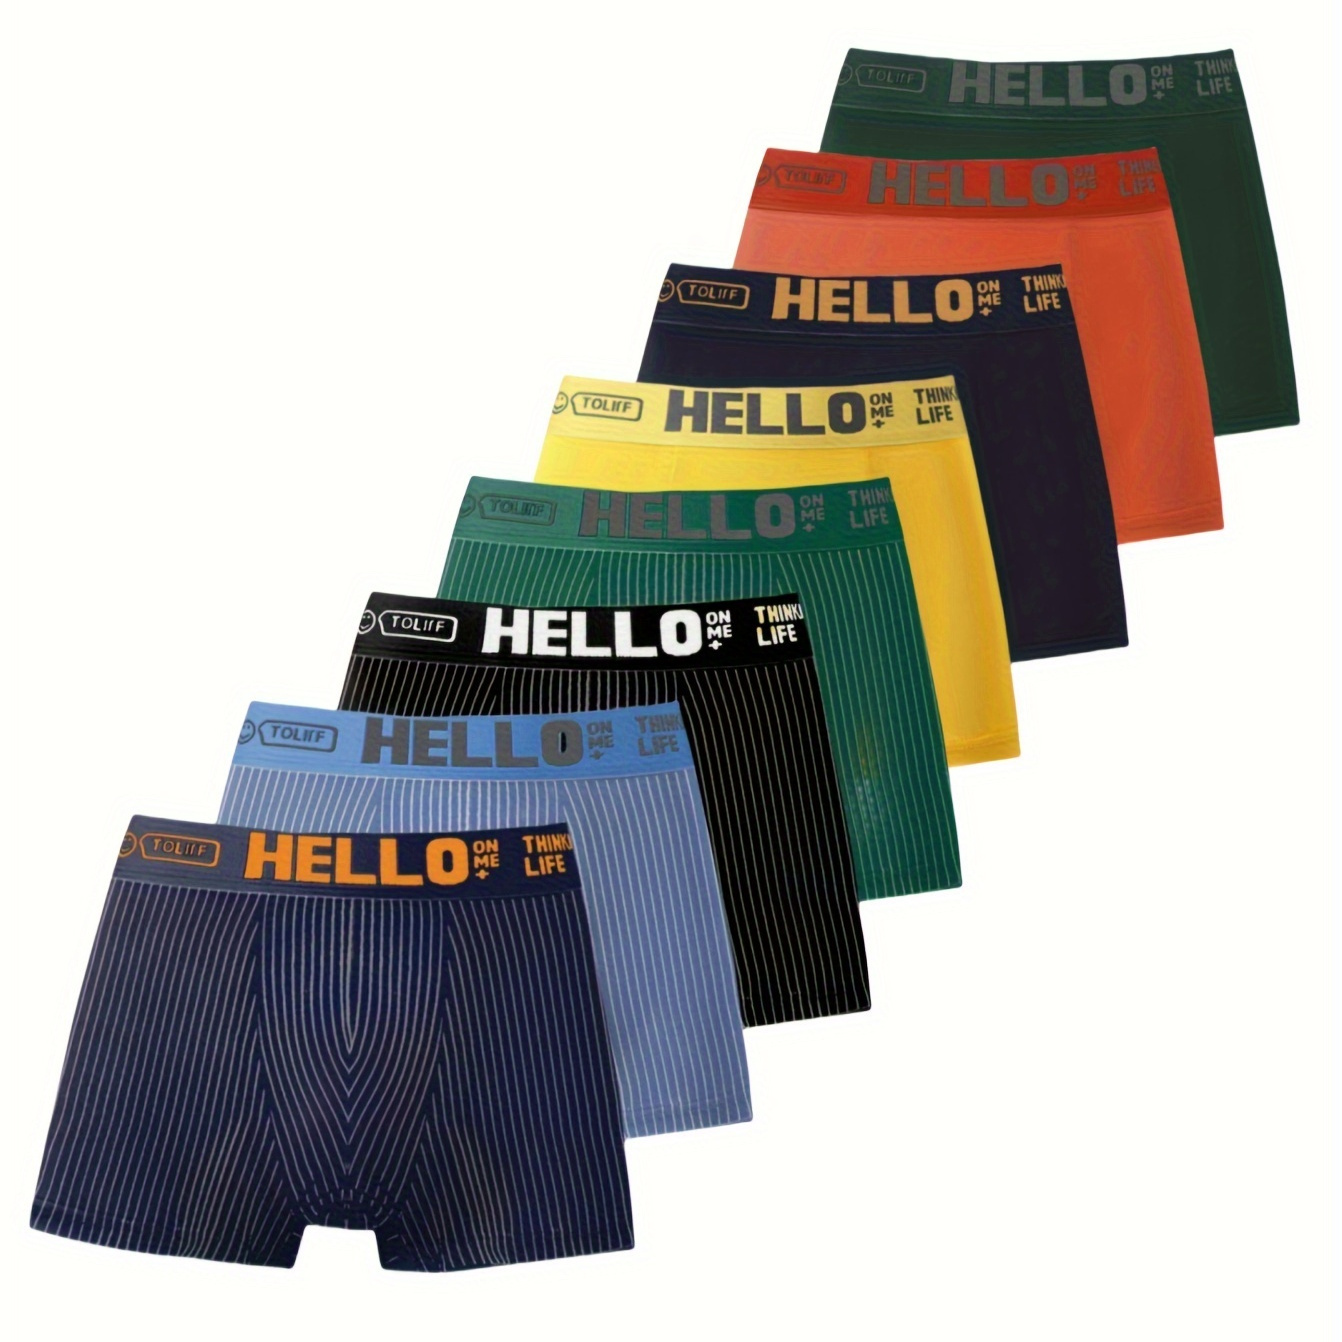 

8pcs Men's Cotton Antibacterial Underwear, Casual Boxer Briefs Shorts, Breathable Comfy Stretchy Boxer Trunks, Sports Shorts